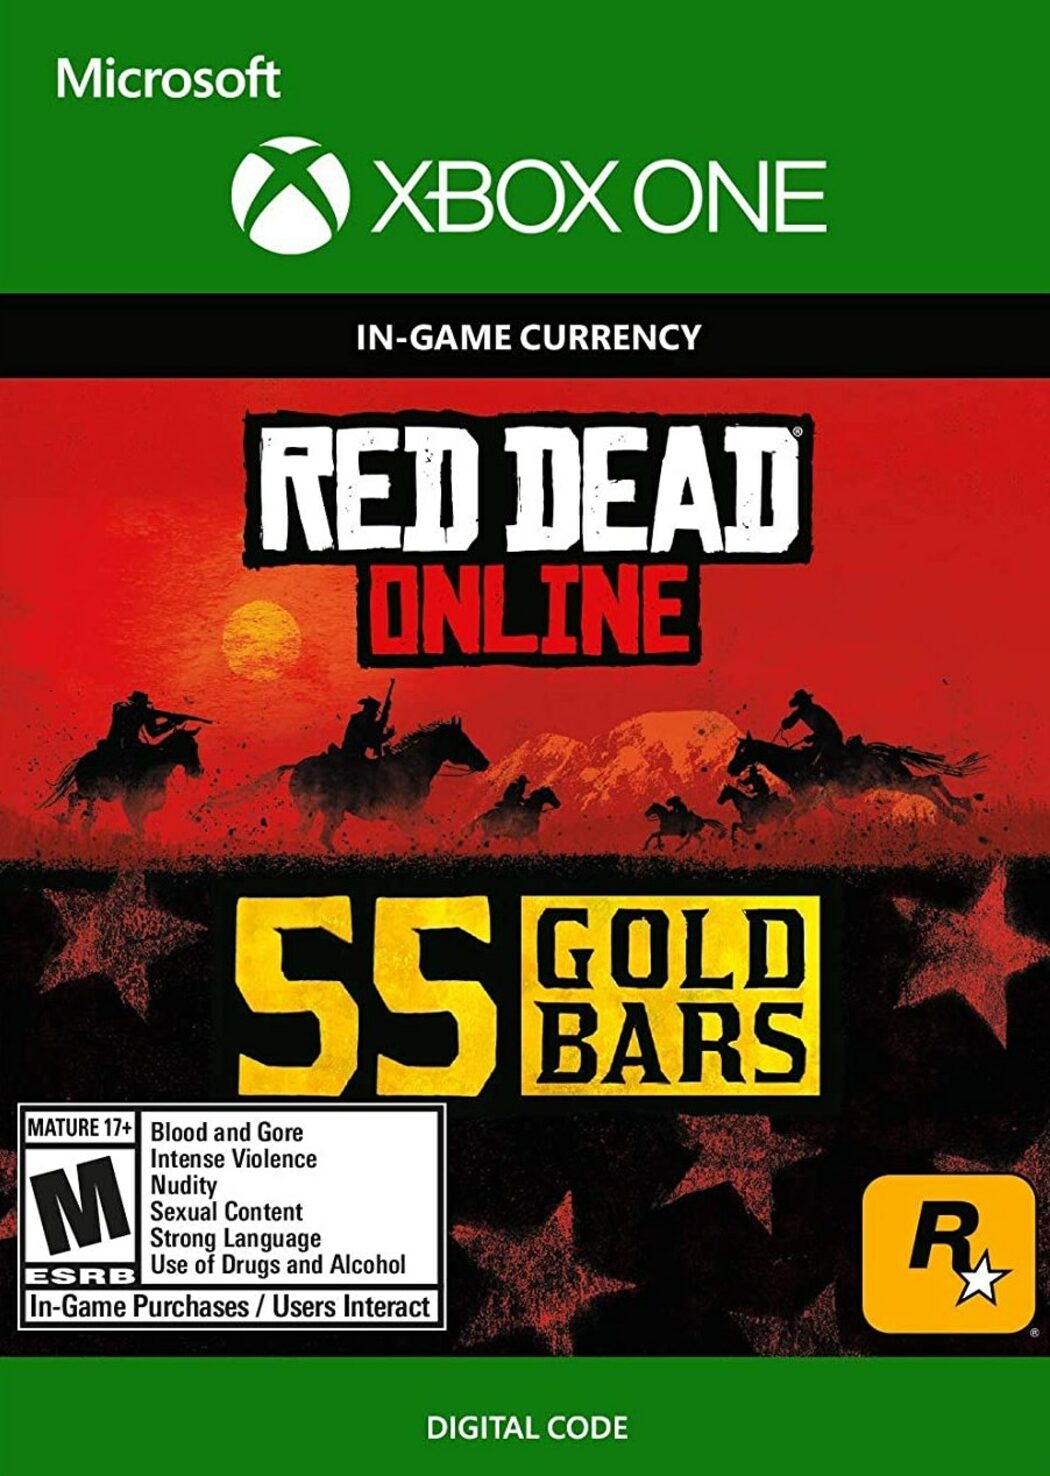 Buy cheap Red Dead Redemption 2 cd key - lowest price